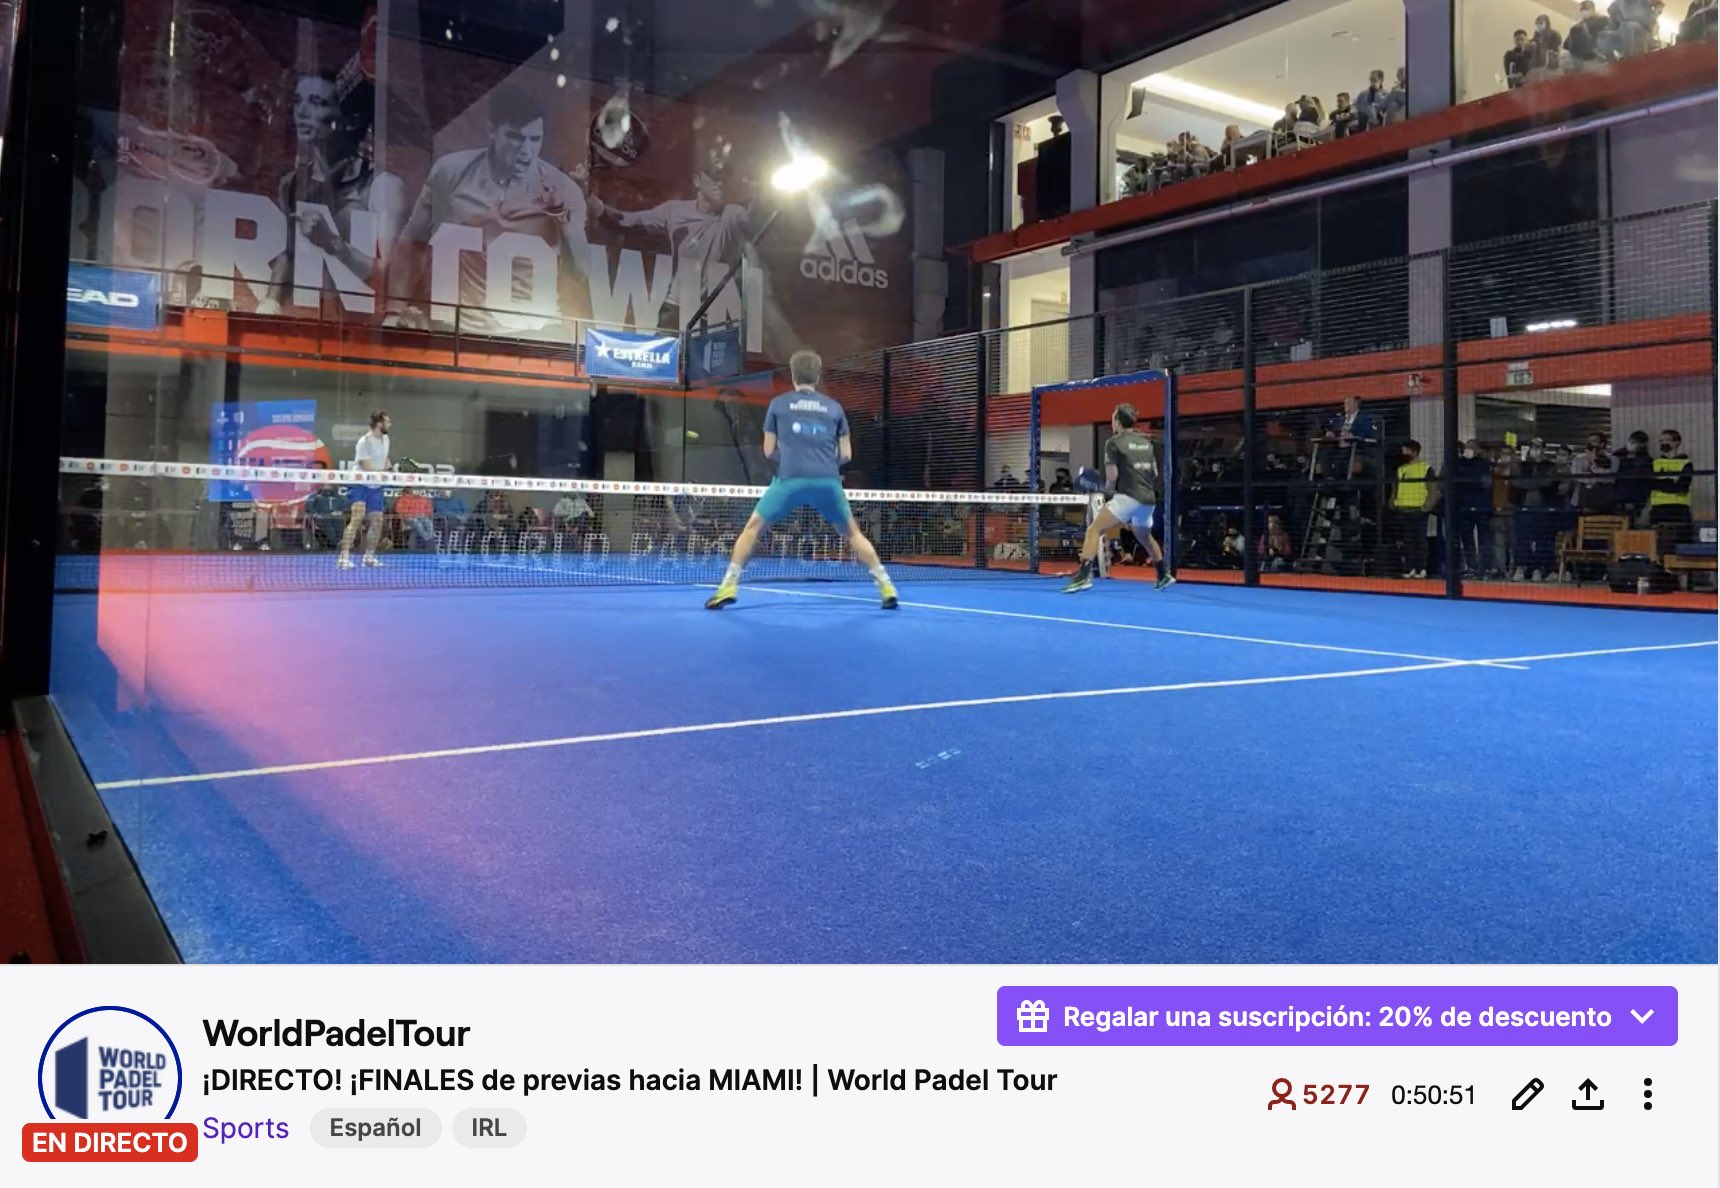 World Padel Tour on Twitter: Wow! More than 5.000 fans enjoying live Qualy matches! 💘 YOU are #WorldPadelTour💙 👉 https://t.co/sAFxcvO81b https://t.co/s092oHJsqv" / Twitter